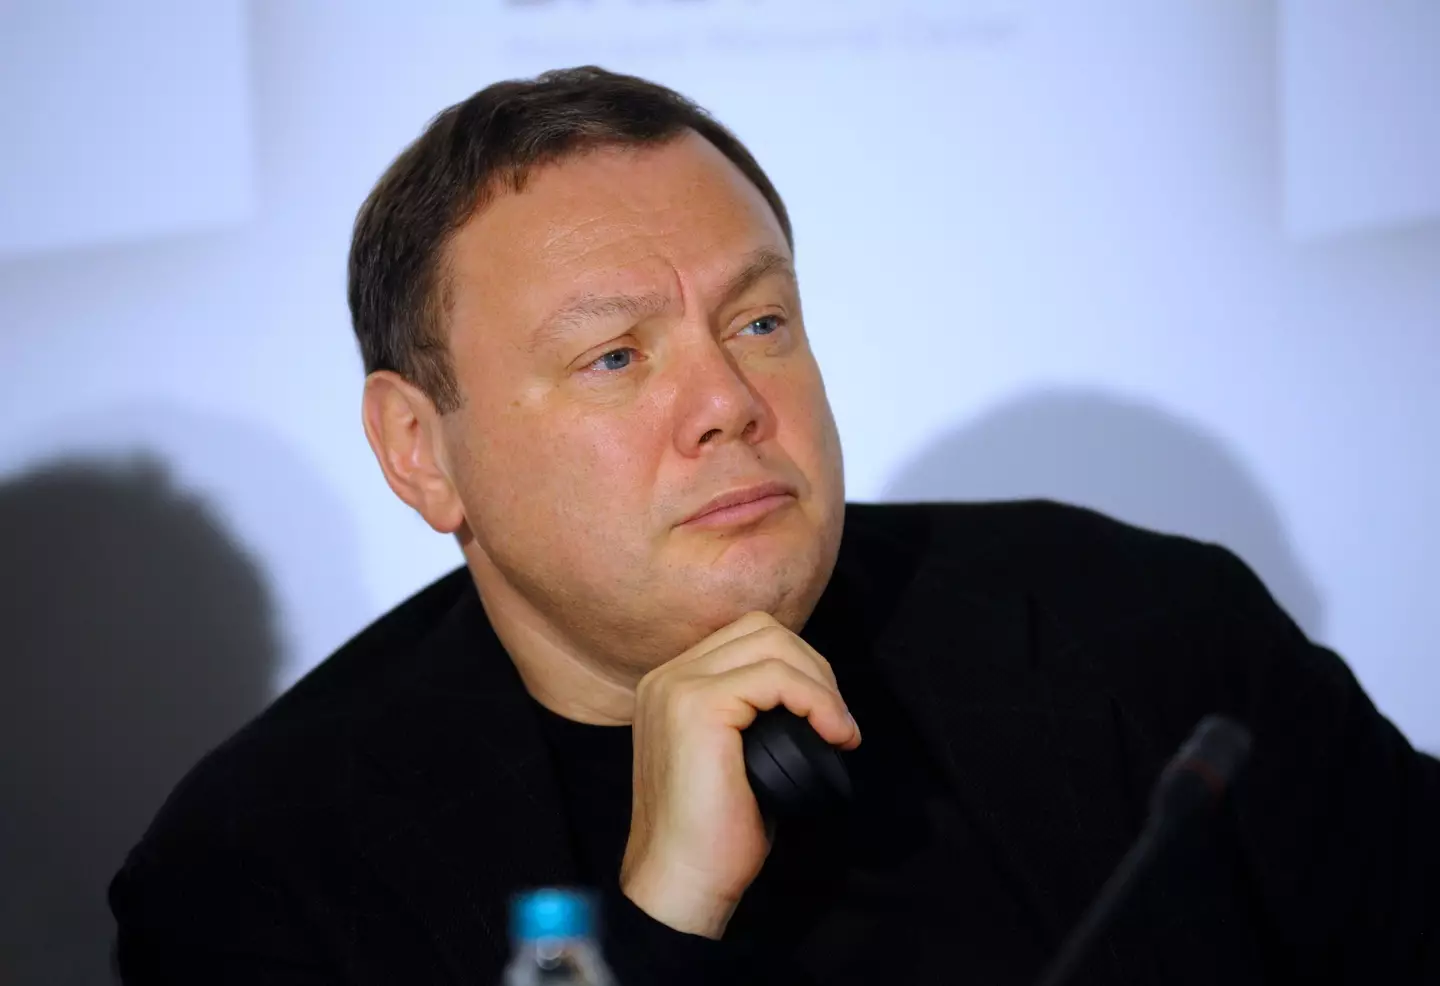 Mikhail Fridman is said to have offered to pay $1 billion from his own pocket to evade sanctions.